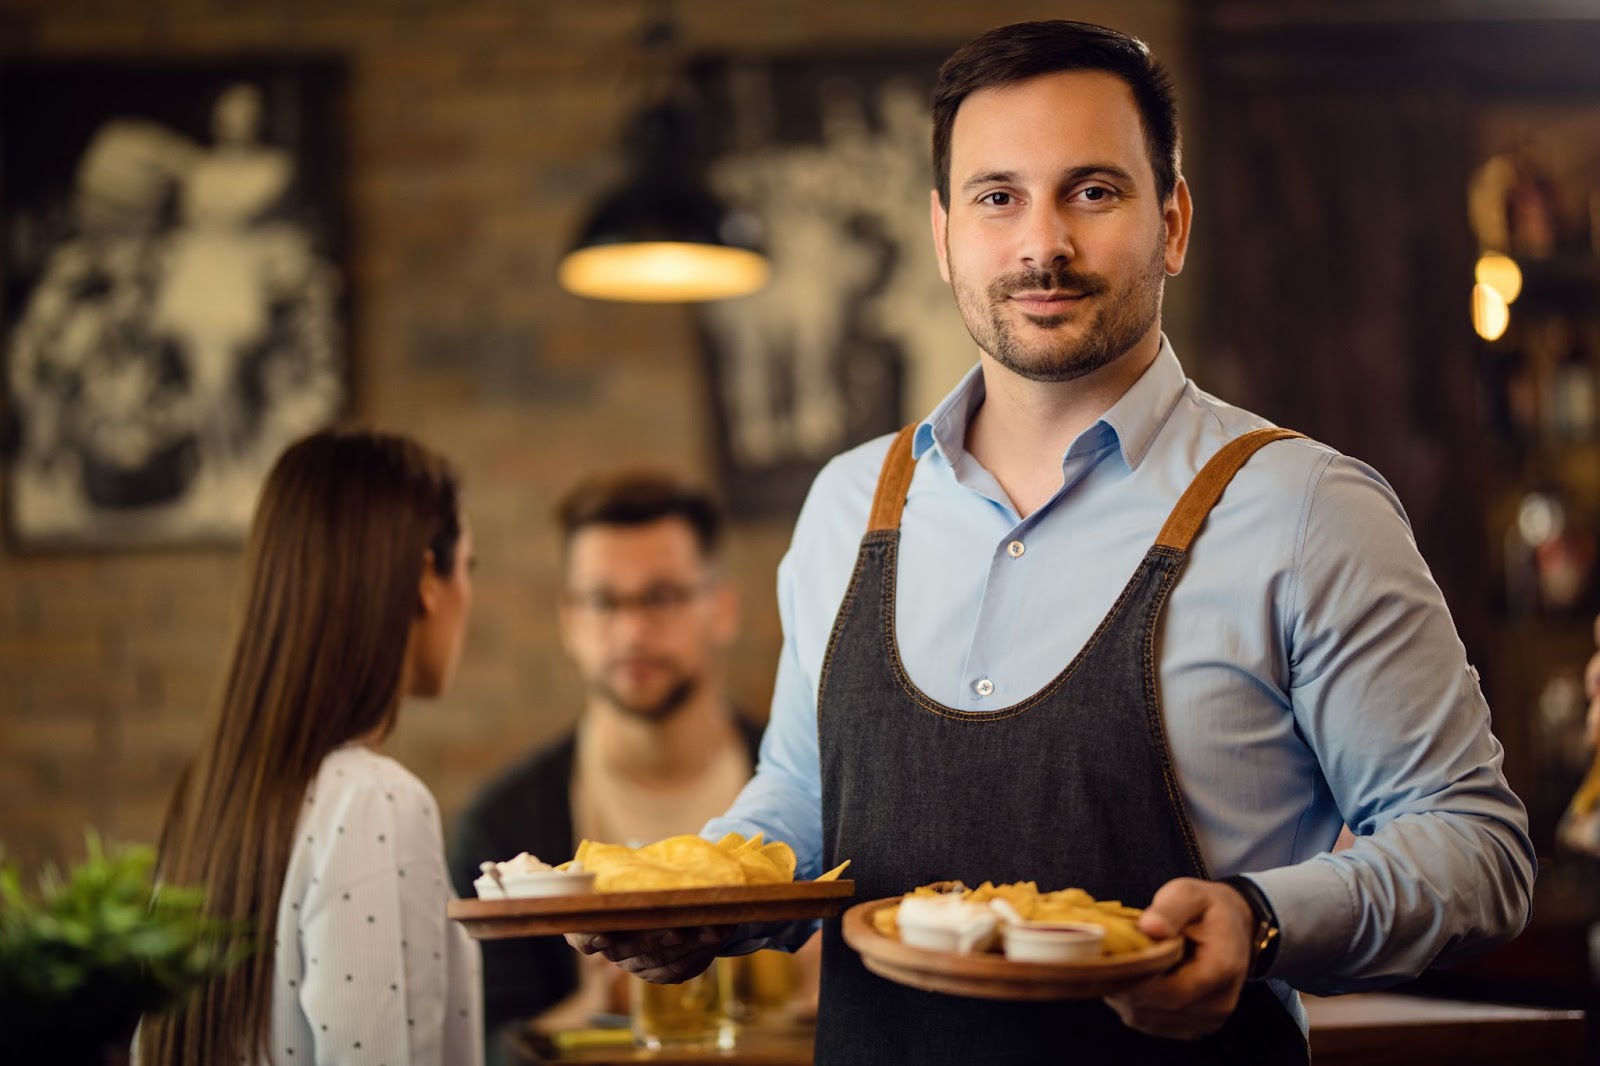 Waiter holding plates with food and looking at camera